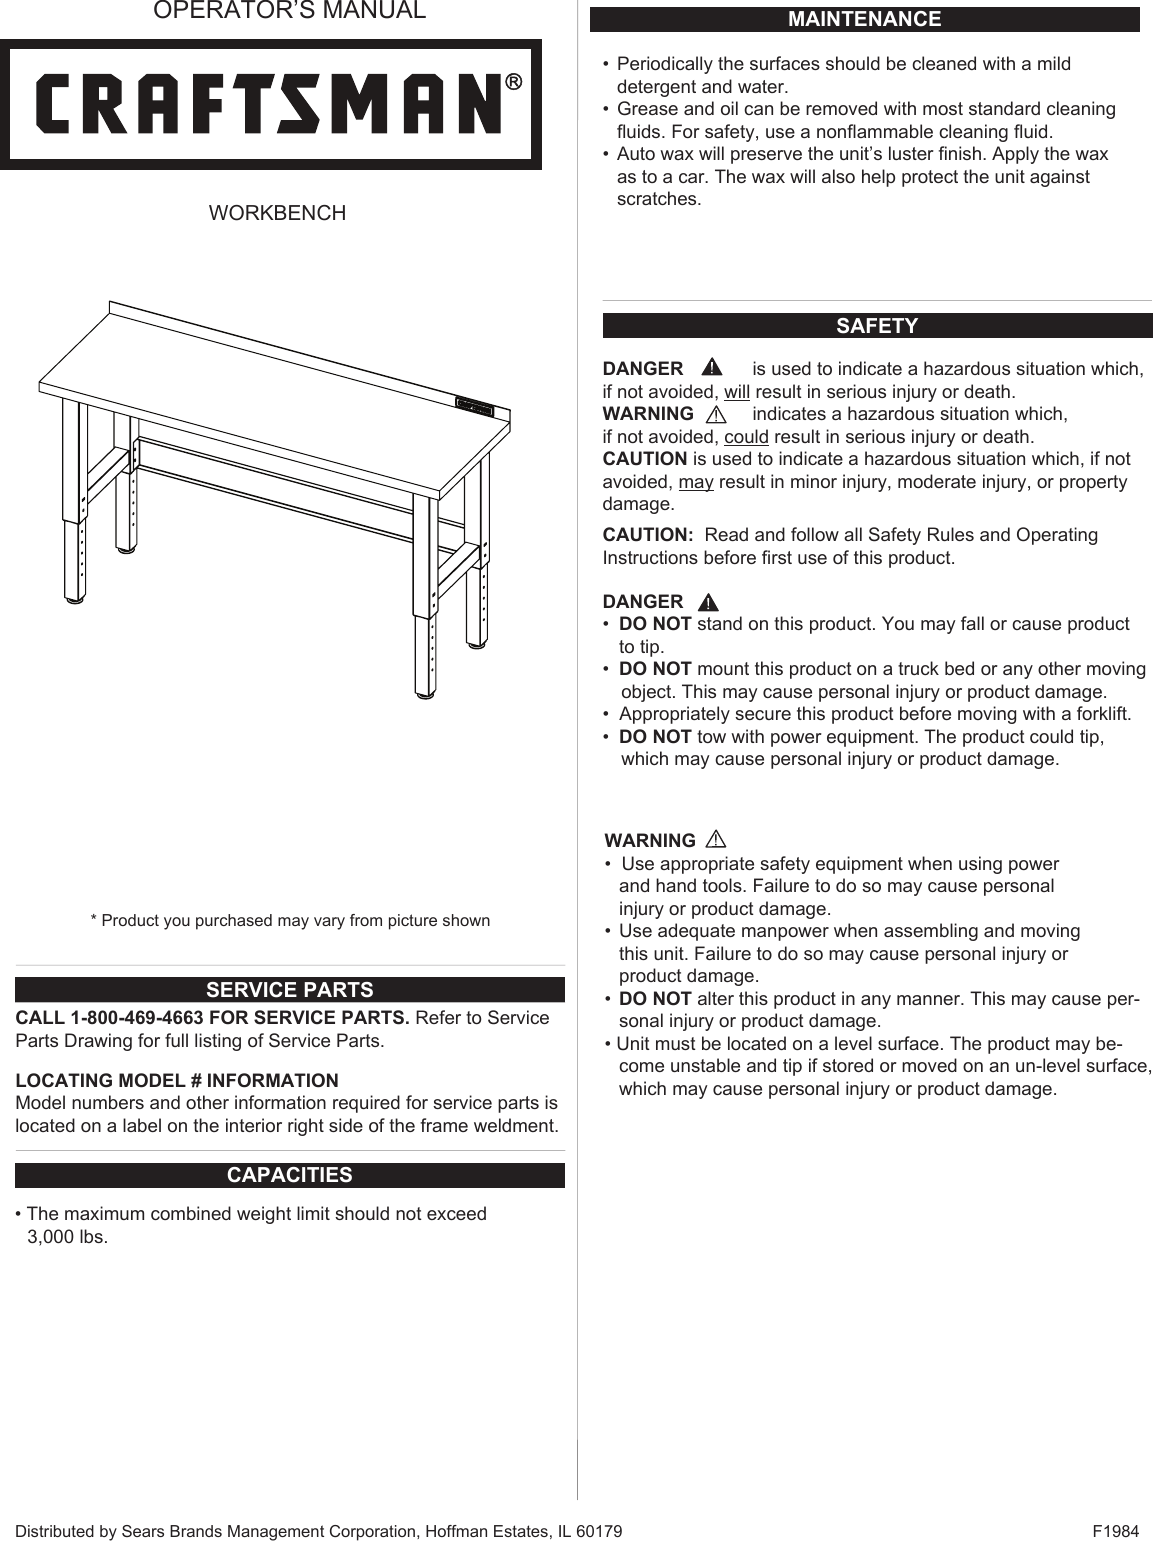 Page 1 of 10 - Craftsman Craftsman-Premium-Heavy-Duty-6-Ft-Workbench-With-Butcher-Block-Top-Instruction-Manual-  Craftsman-premium-heavy-duty-6-ft-workbench-with-butcher-block-top-instruction-manual